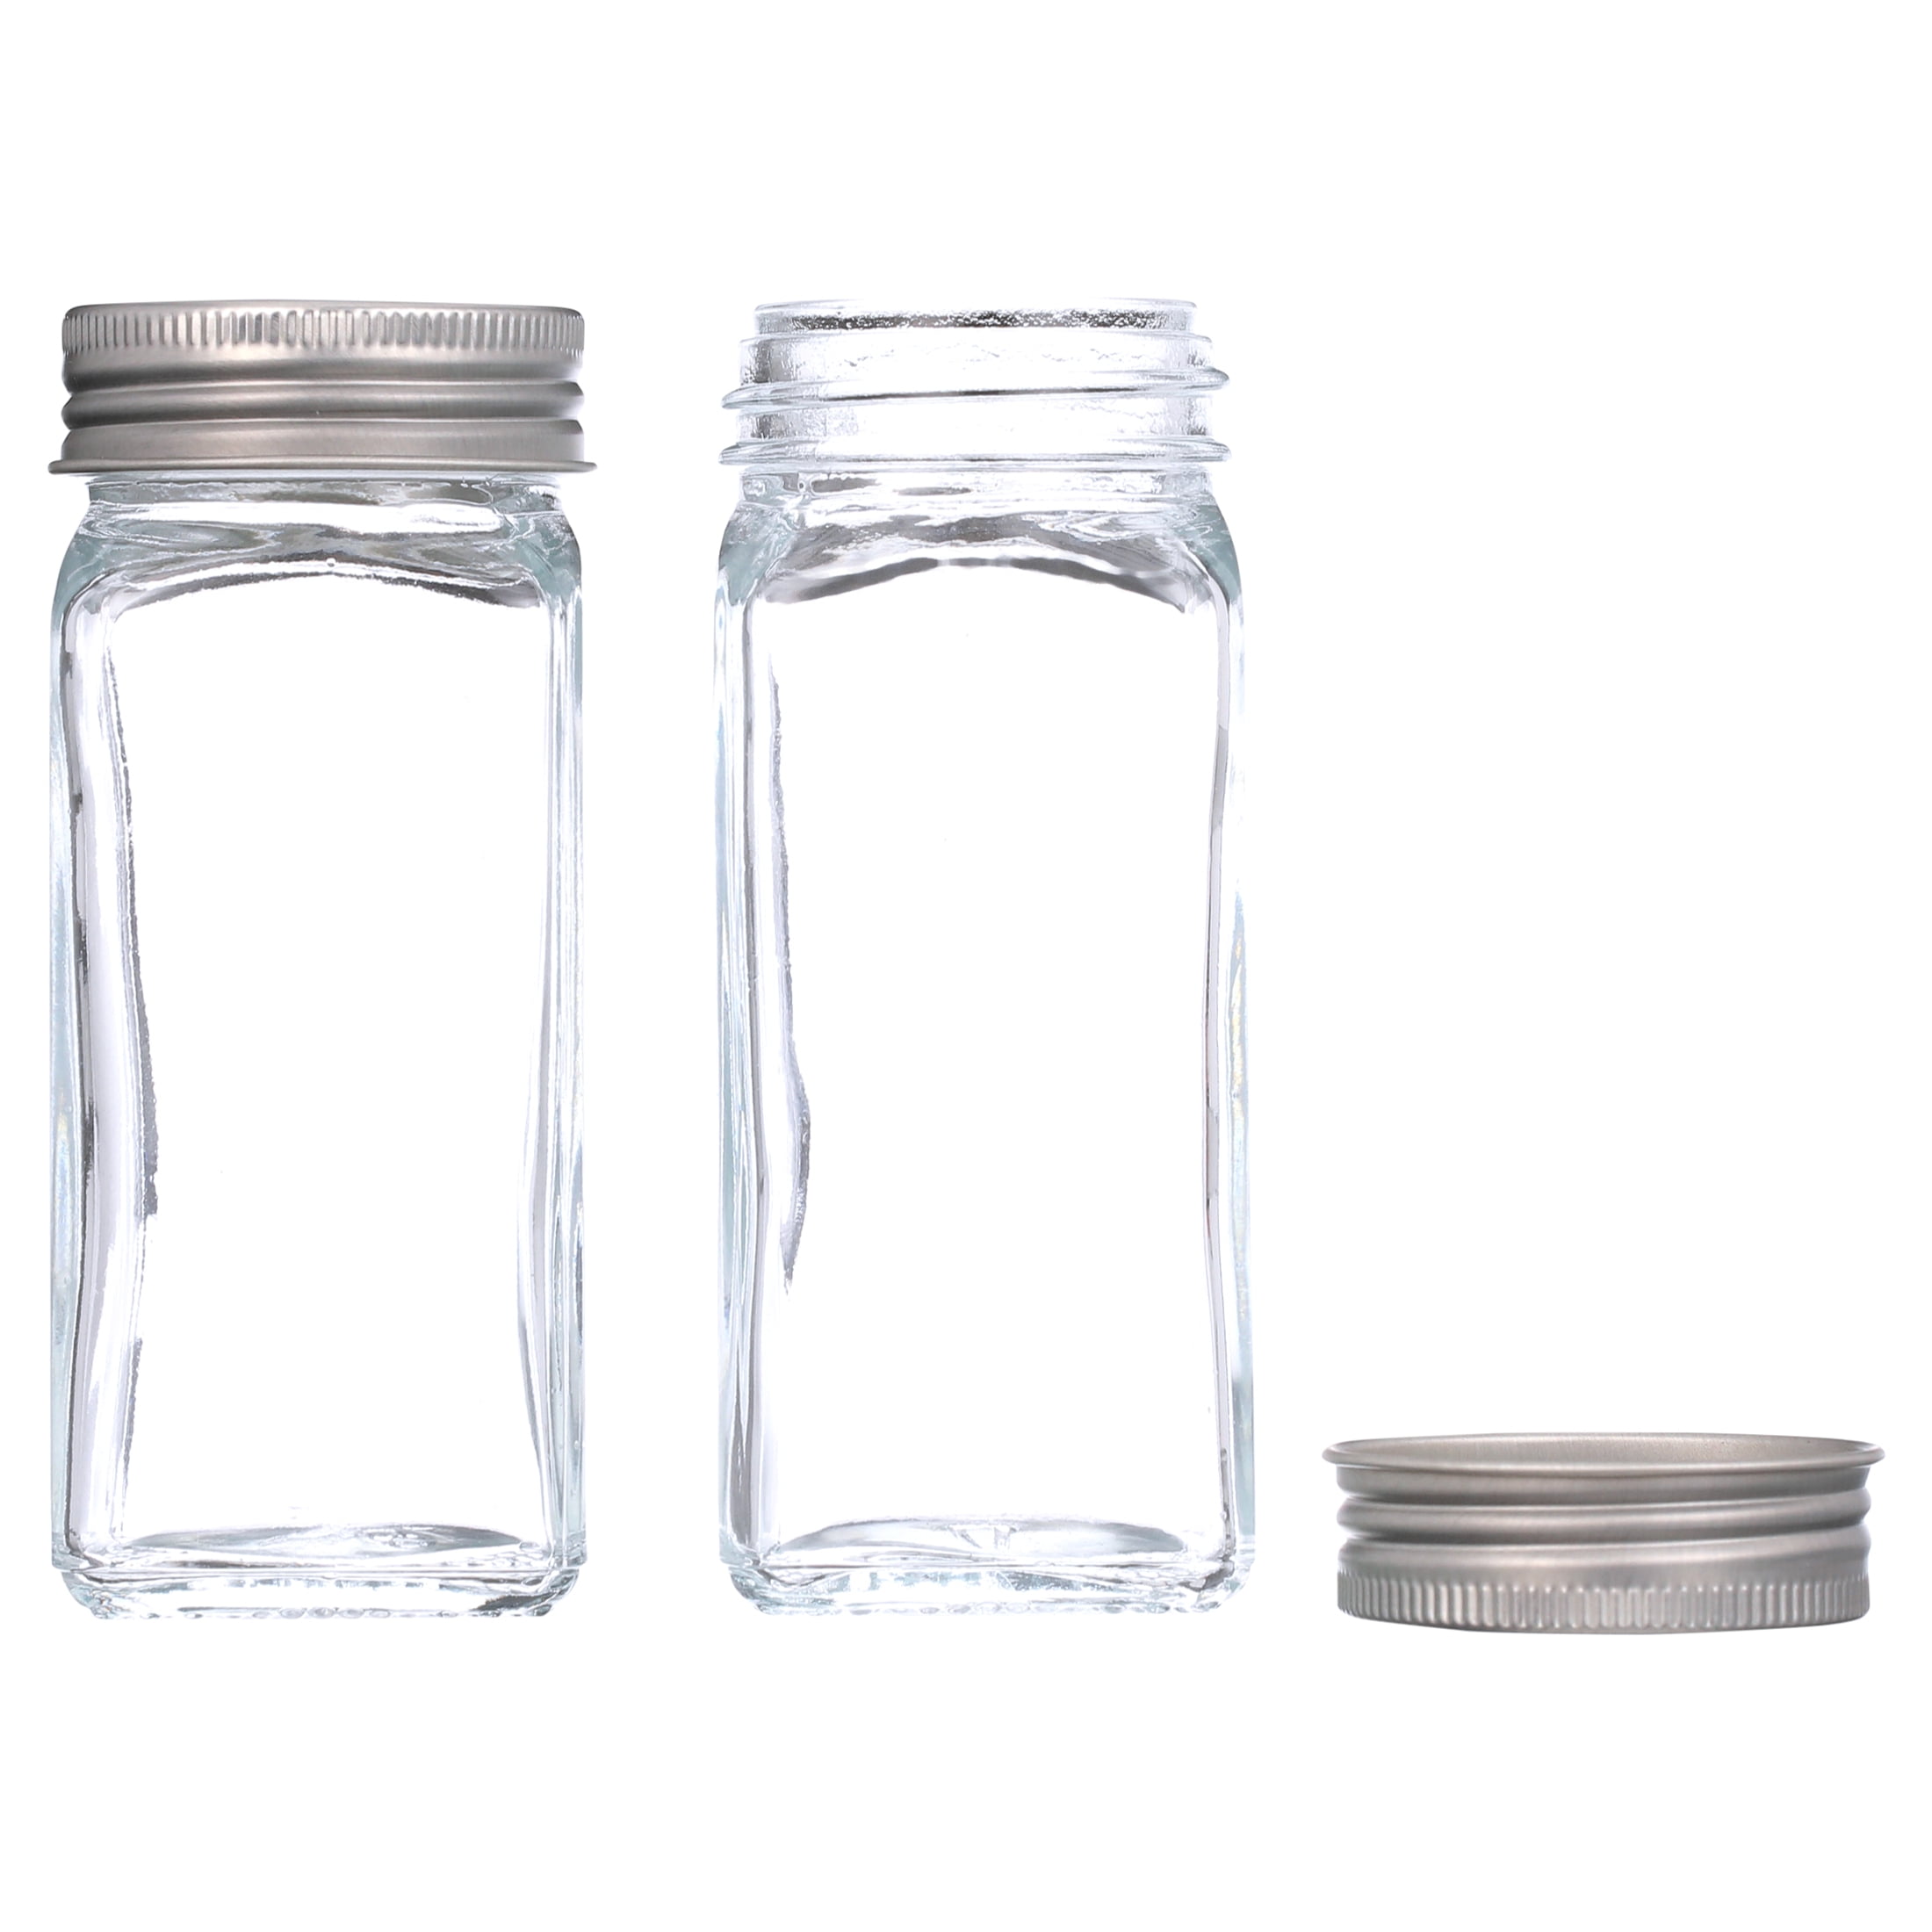 12 White Metal Lids for Square Spice Jars - Fits Glass Spice Bottles by  SpiceLuxe ONLY